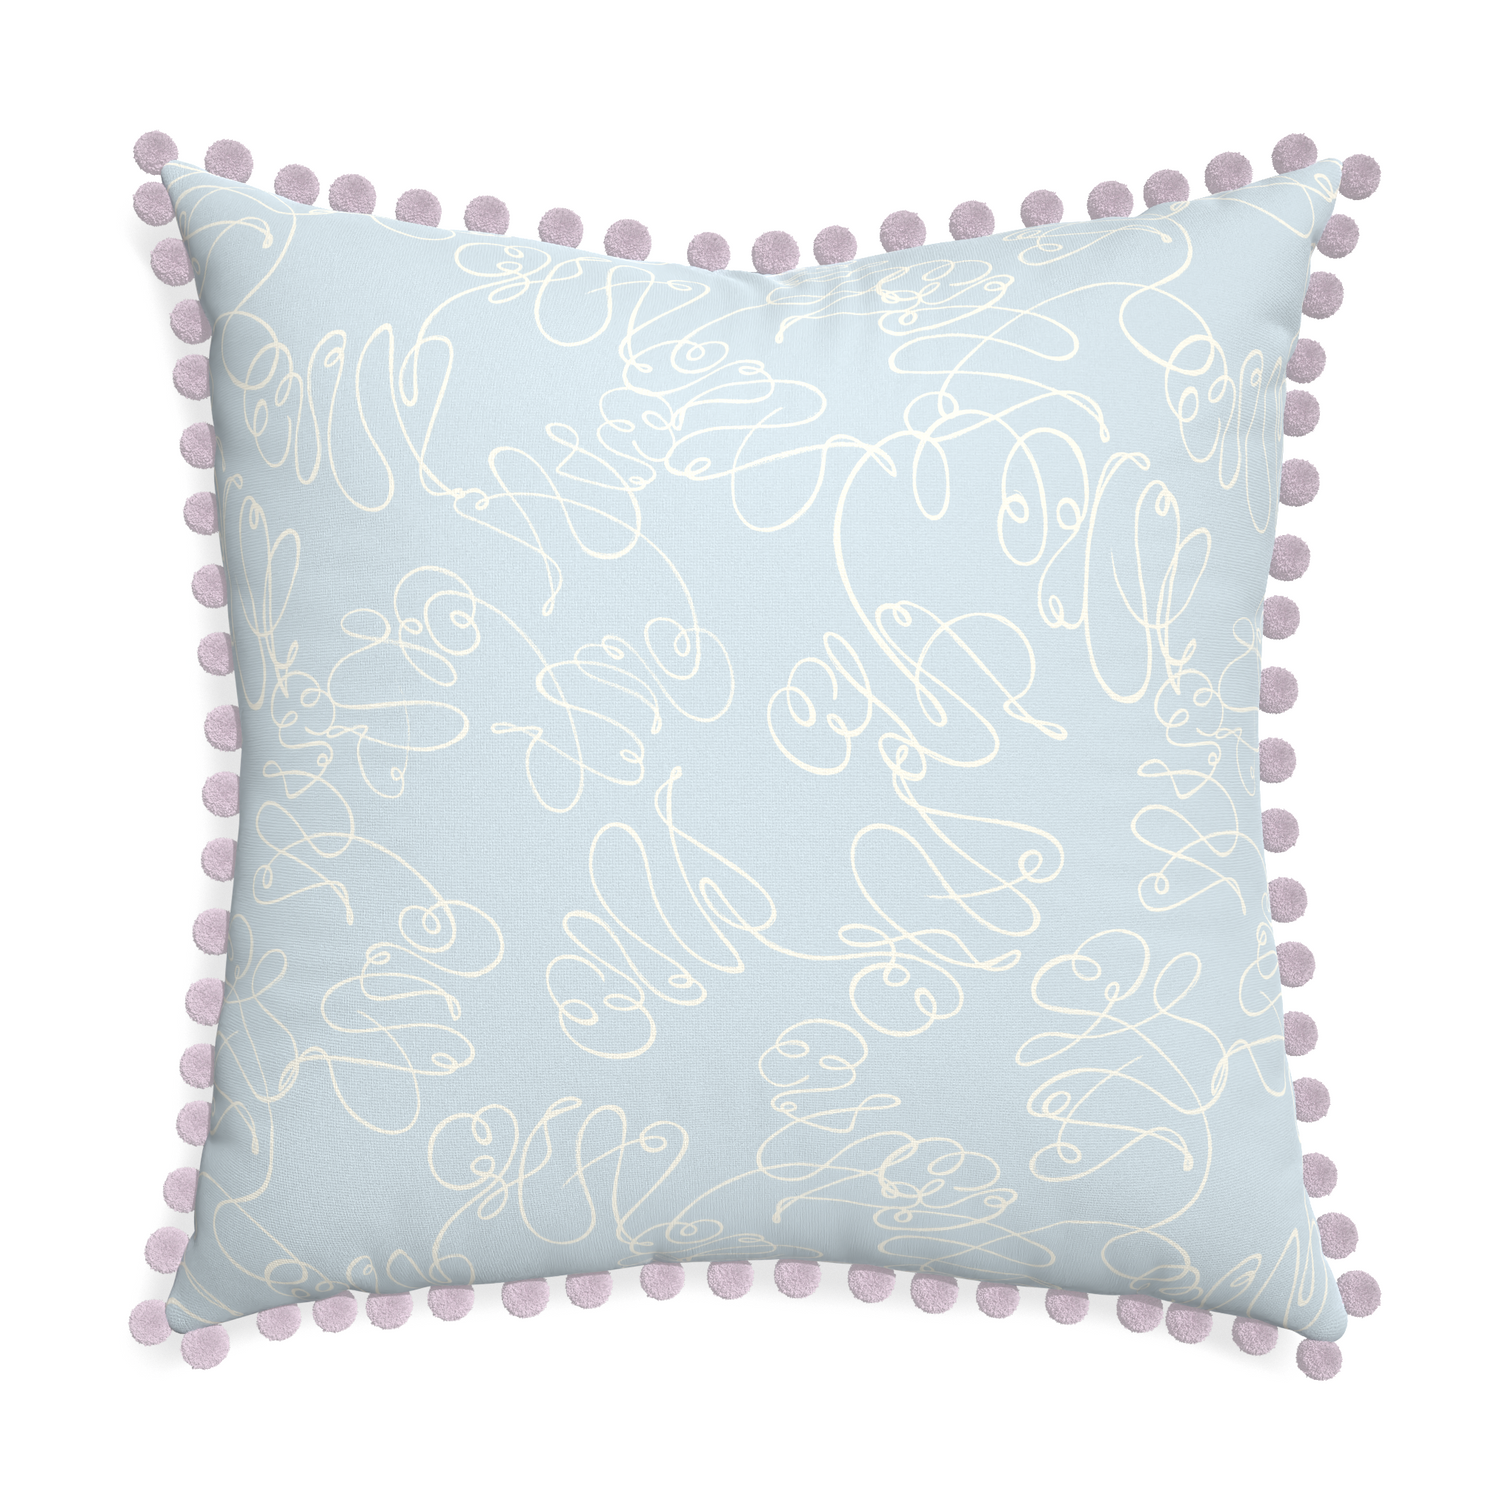 Euro-sham mirabella custom powder blue abstractpillow with l on white background